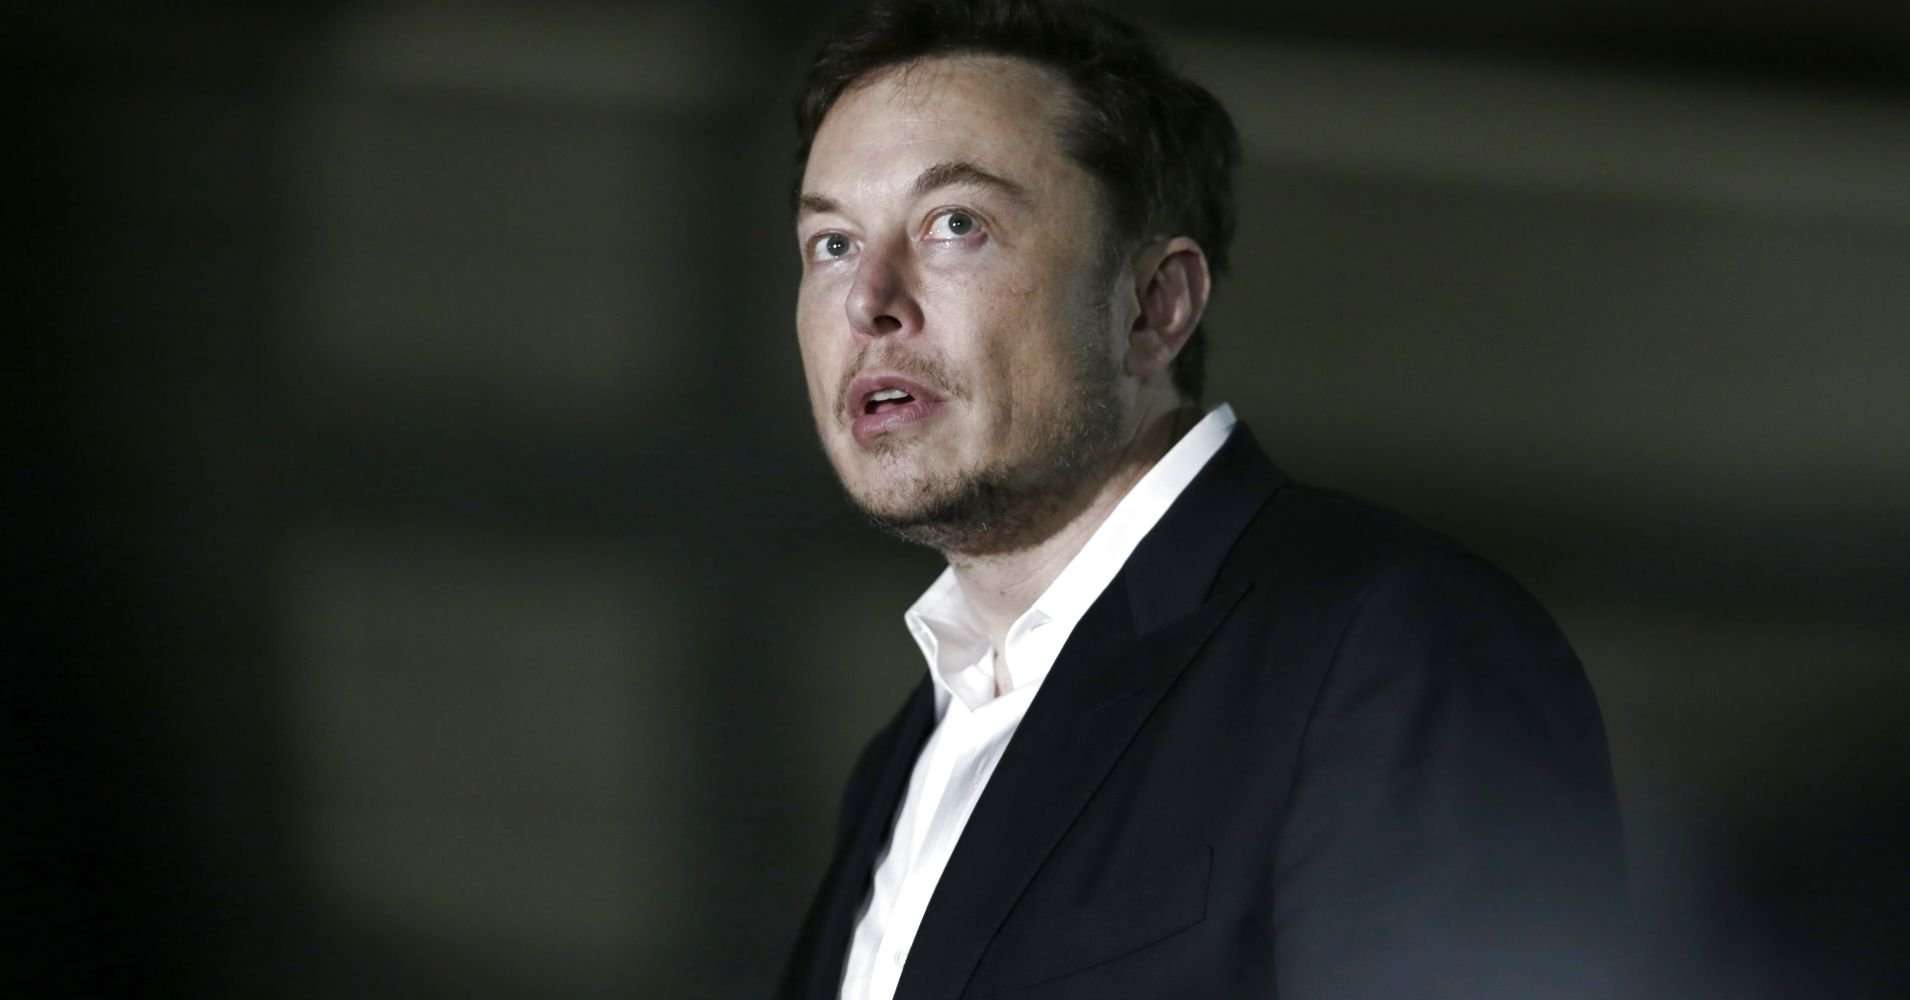 image for SEC charges Tesla CEO Elon Musk with fraud